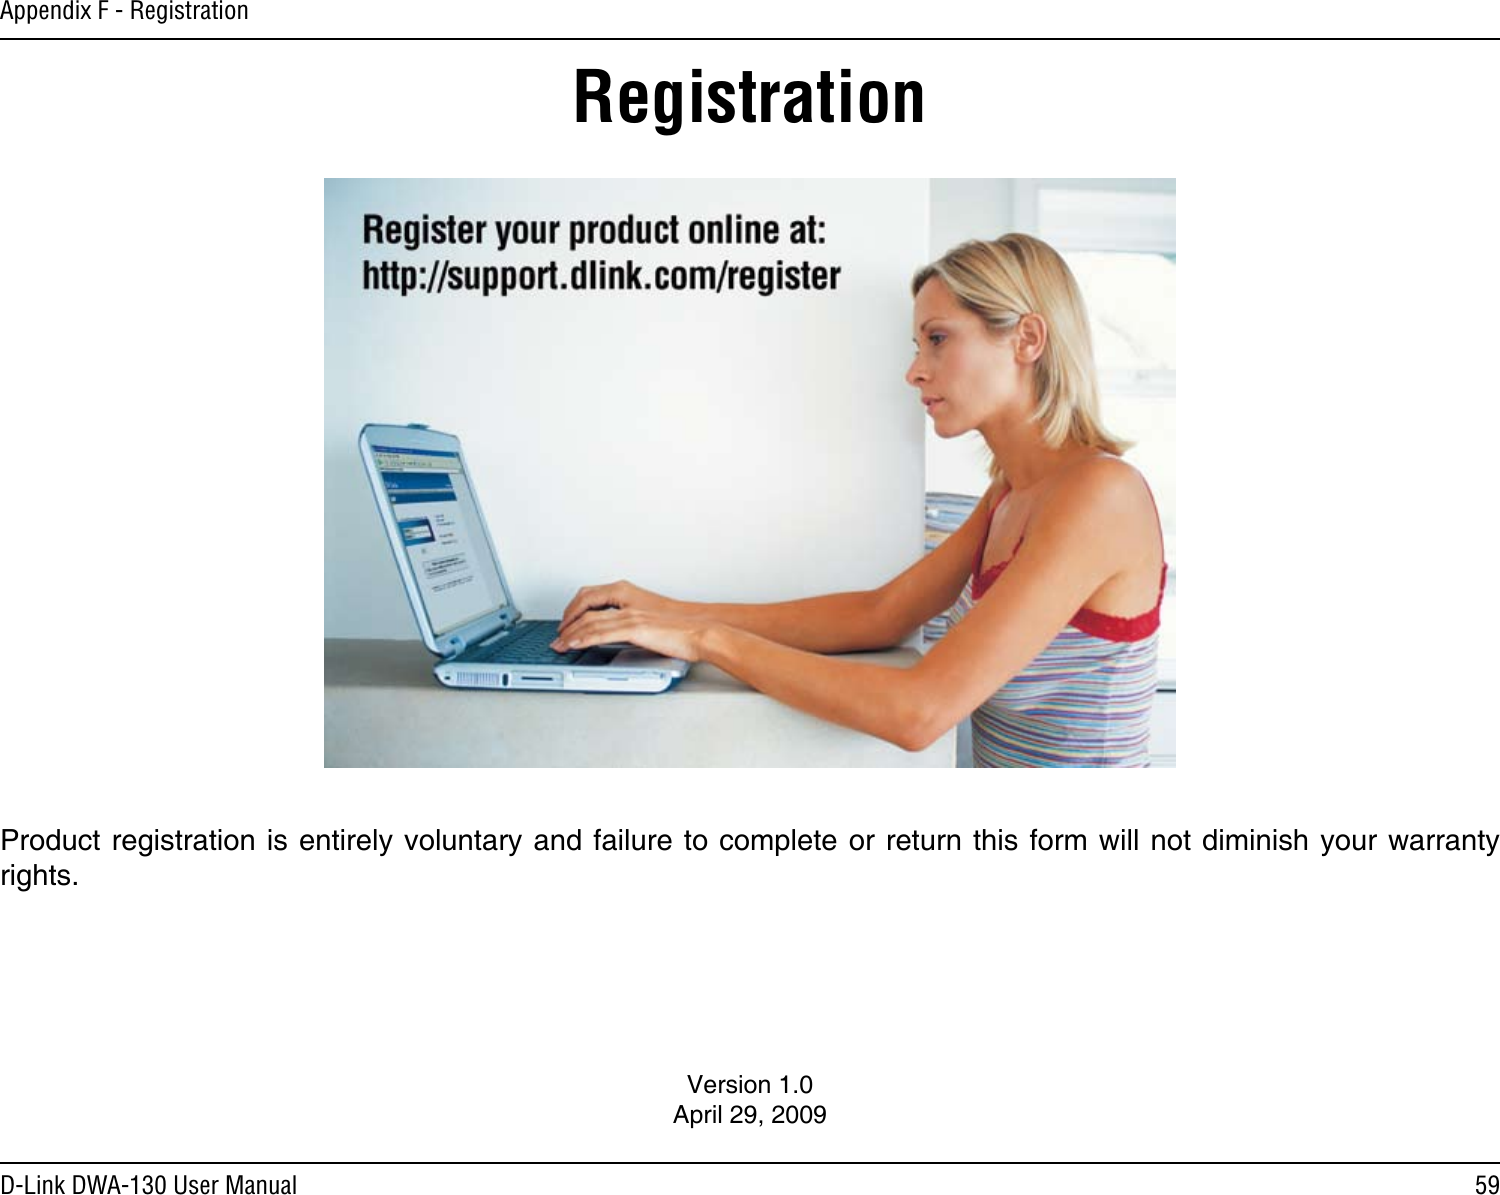 59D-Link DWA-130 User ManualAppendix F - RegistrationVersion 1.0April 29, 2009Product registration is entirely voluntary and failure to complete or return this form will not diminish your warranty rights.Registration